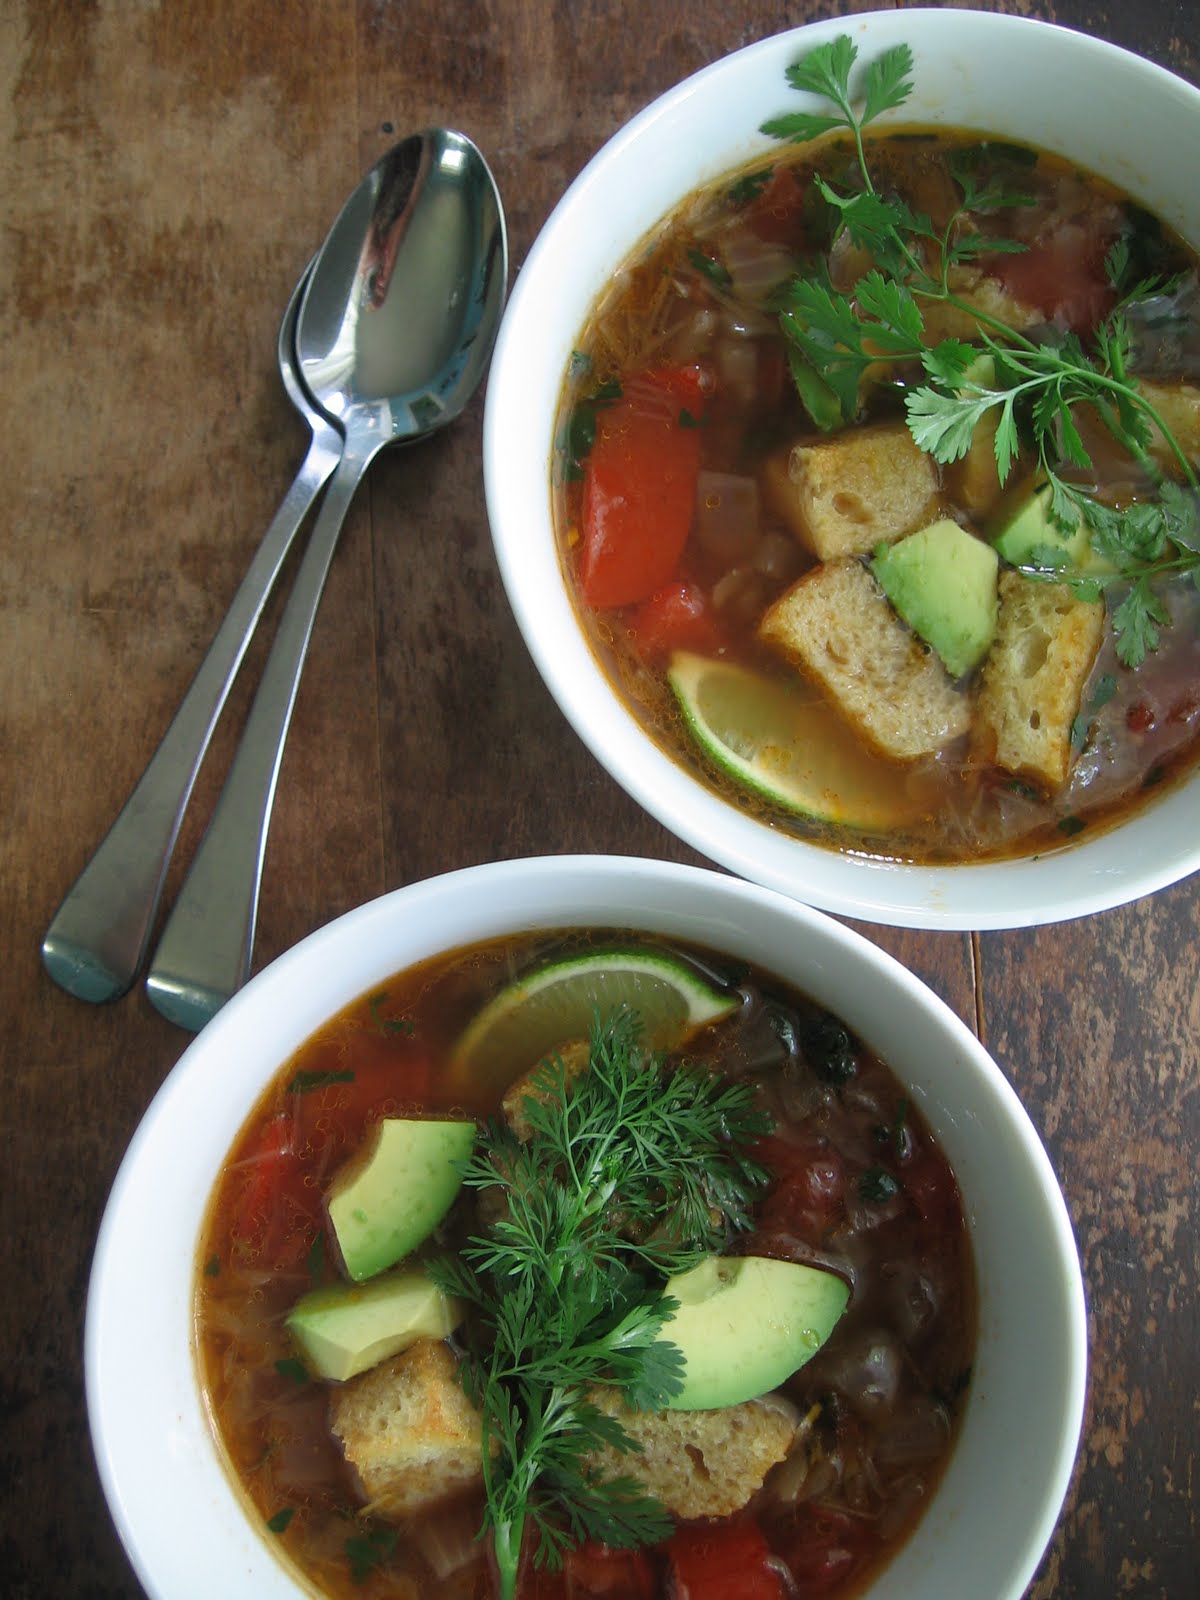 sweetsugarbean: Mexican Tomato Chickpea Soup - Don't Forget the Croutons!